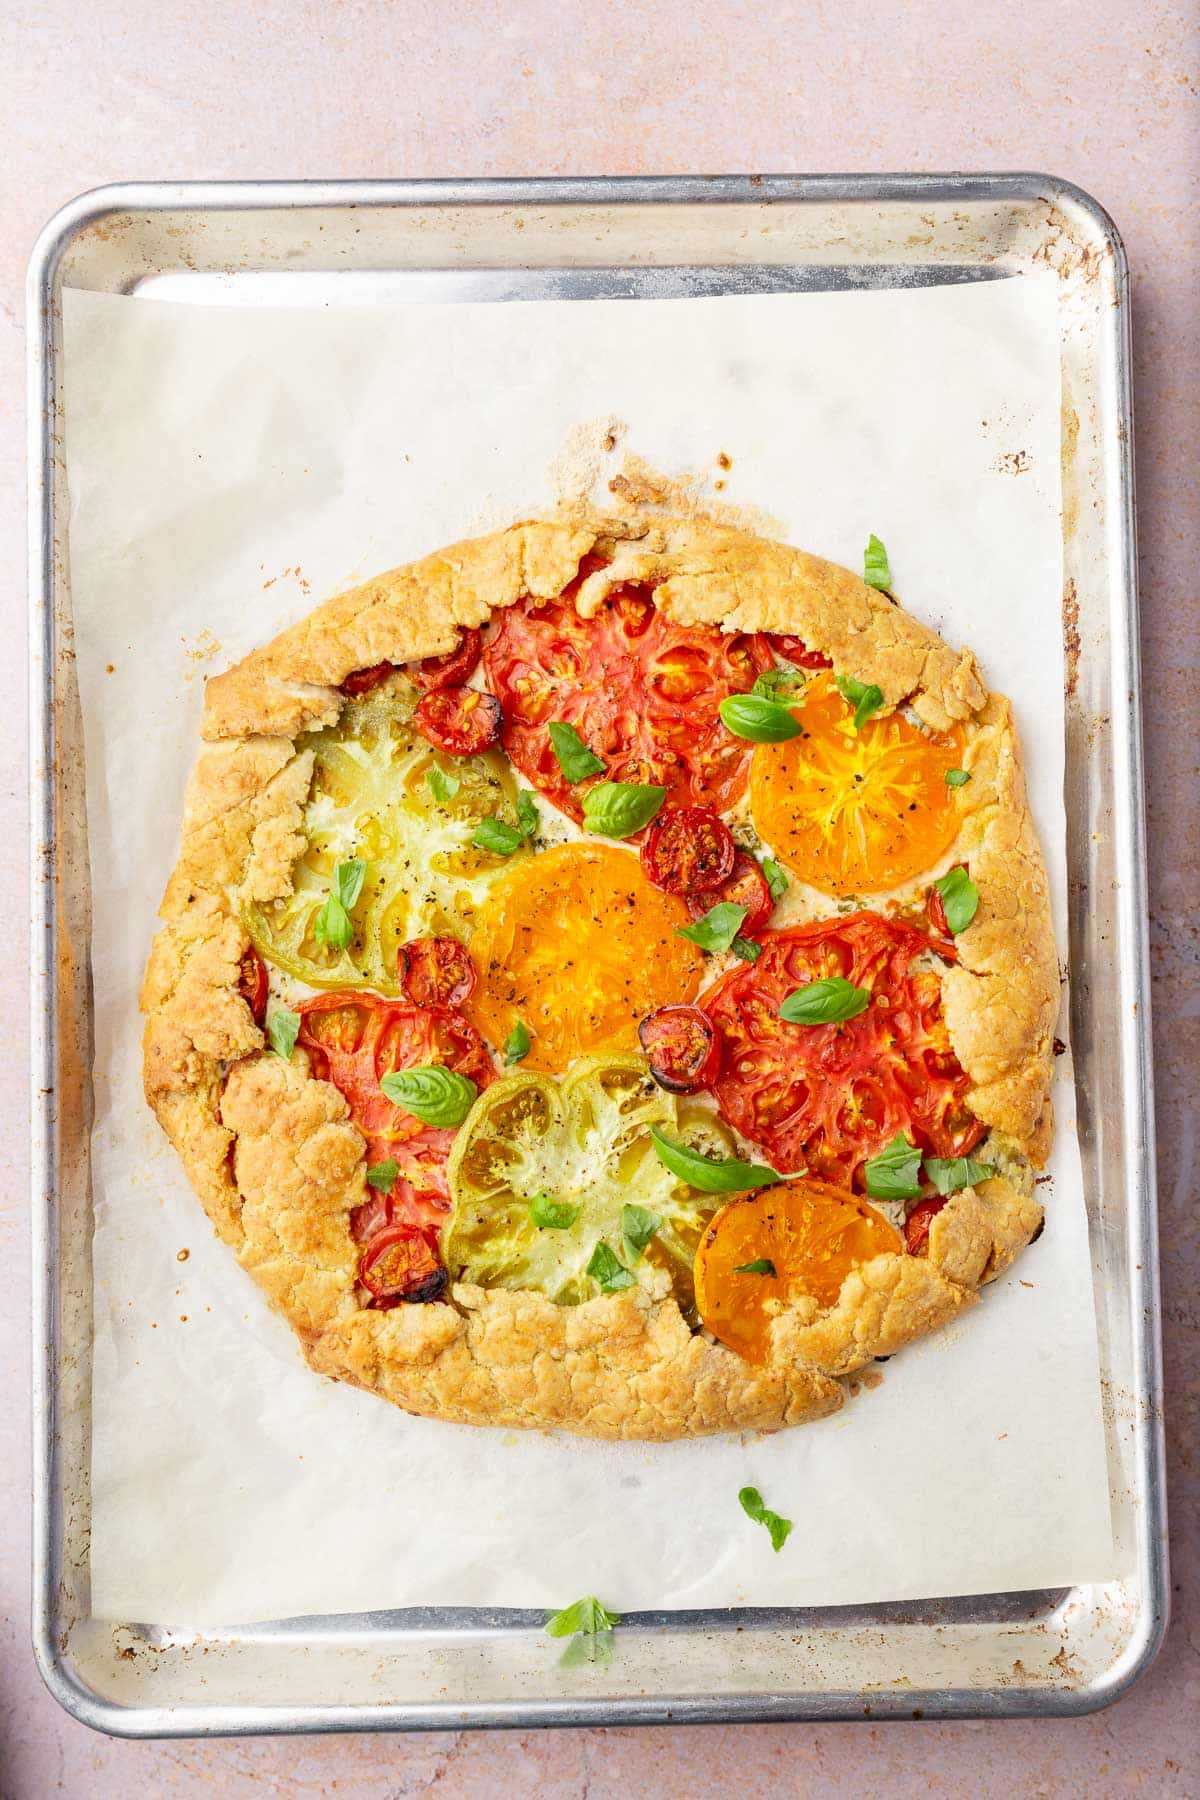 A tomato basil galette on a sheet pan lined with parchment paper.